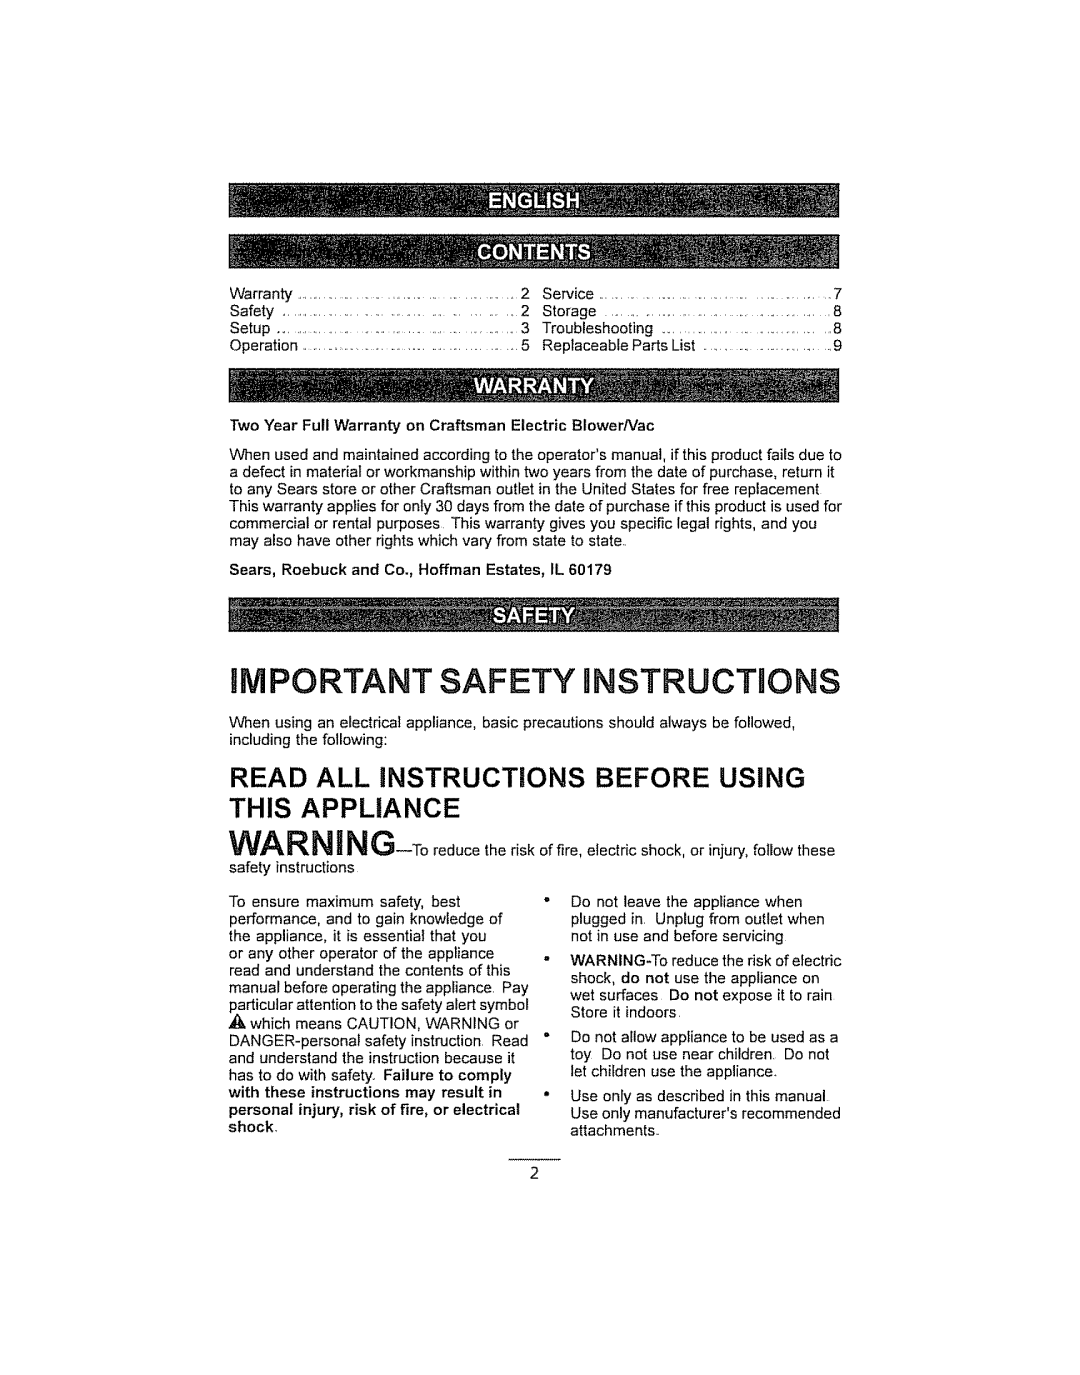 Craftsman 136.748270, G006299, 280030785 iMPORTANT SAFETY iNSTRUCTiONS, Read All Instructions Before Using This Appliance 